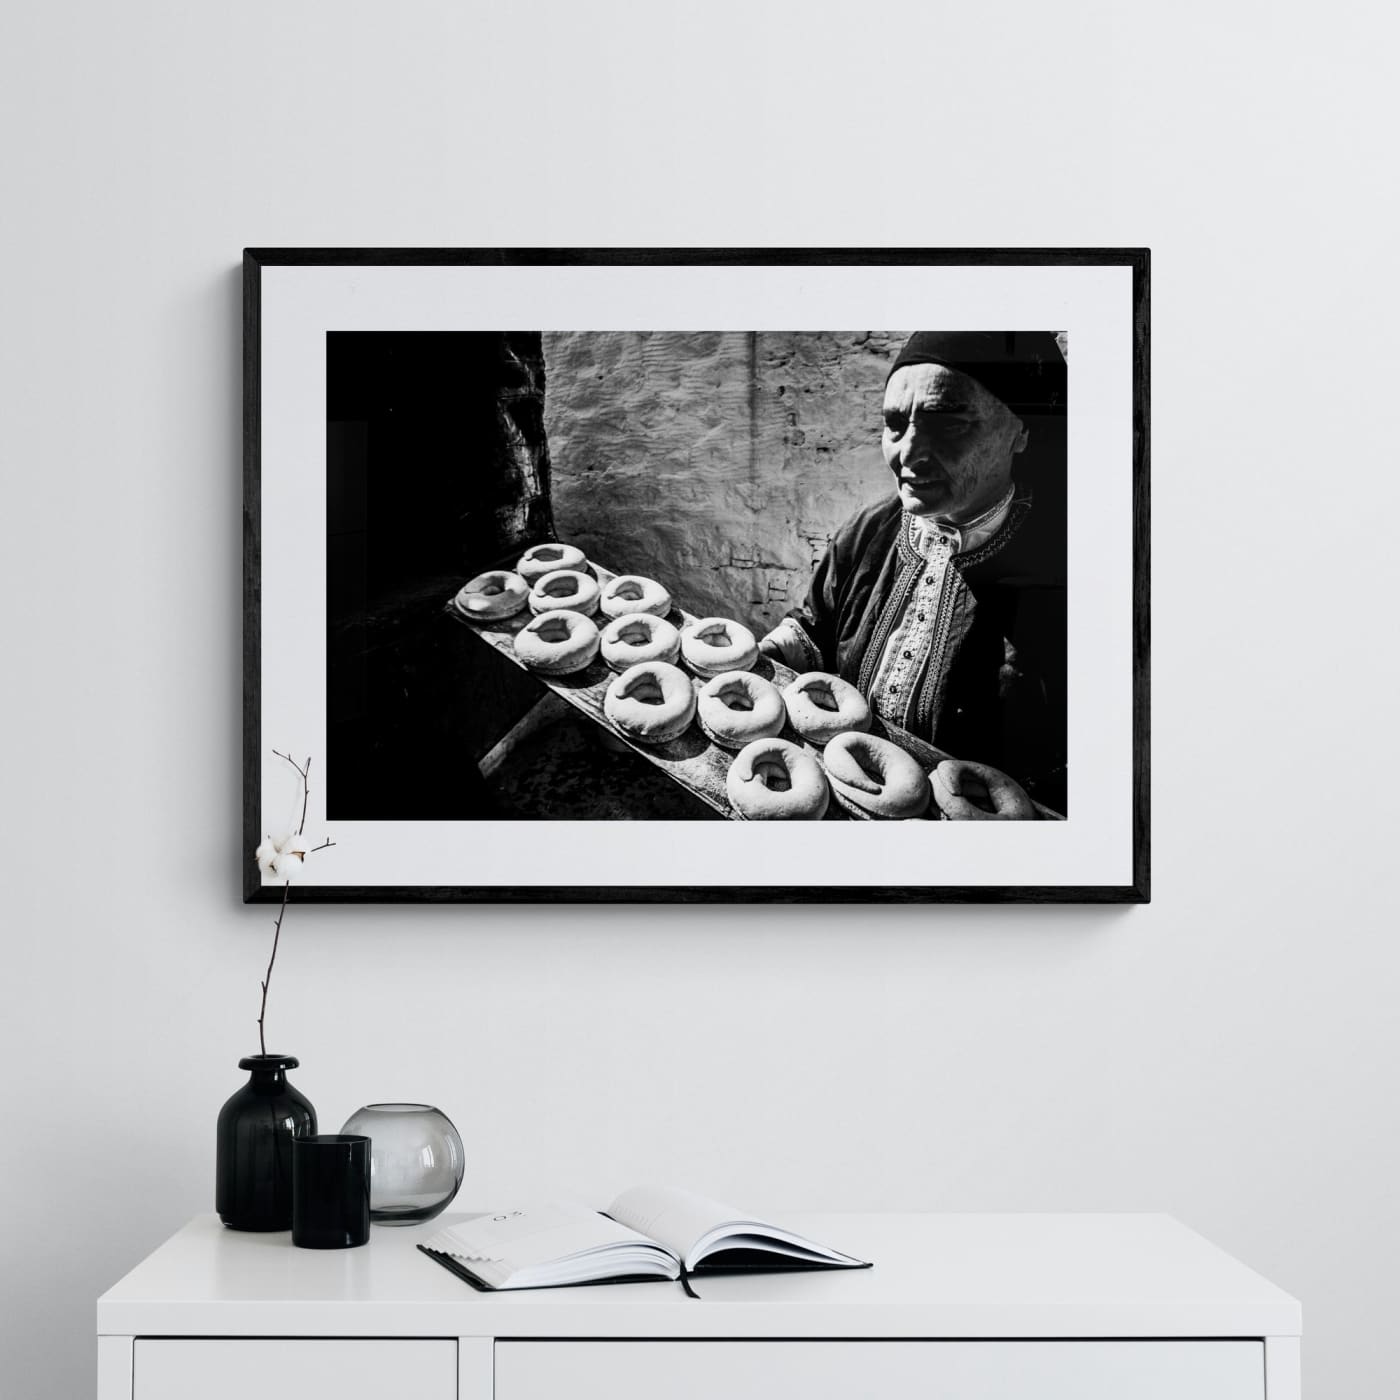 Black and White Photography Wall Art Greece | Baking cookies for Easter in Olympos Karpathos Dodecanese by George Tatakis - single framed photo